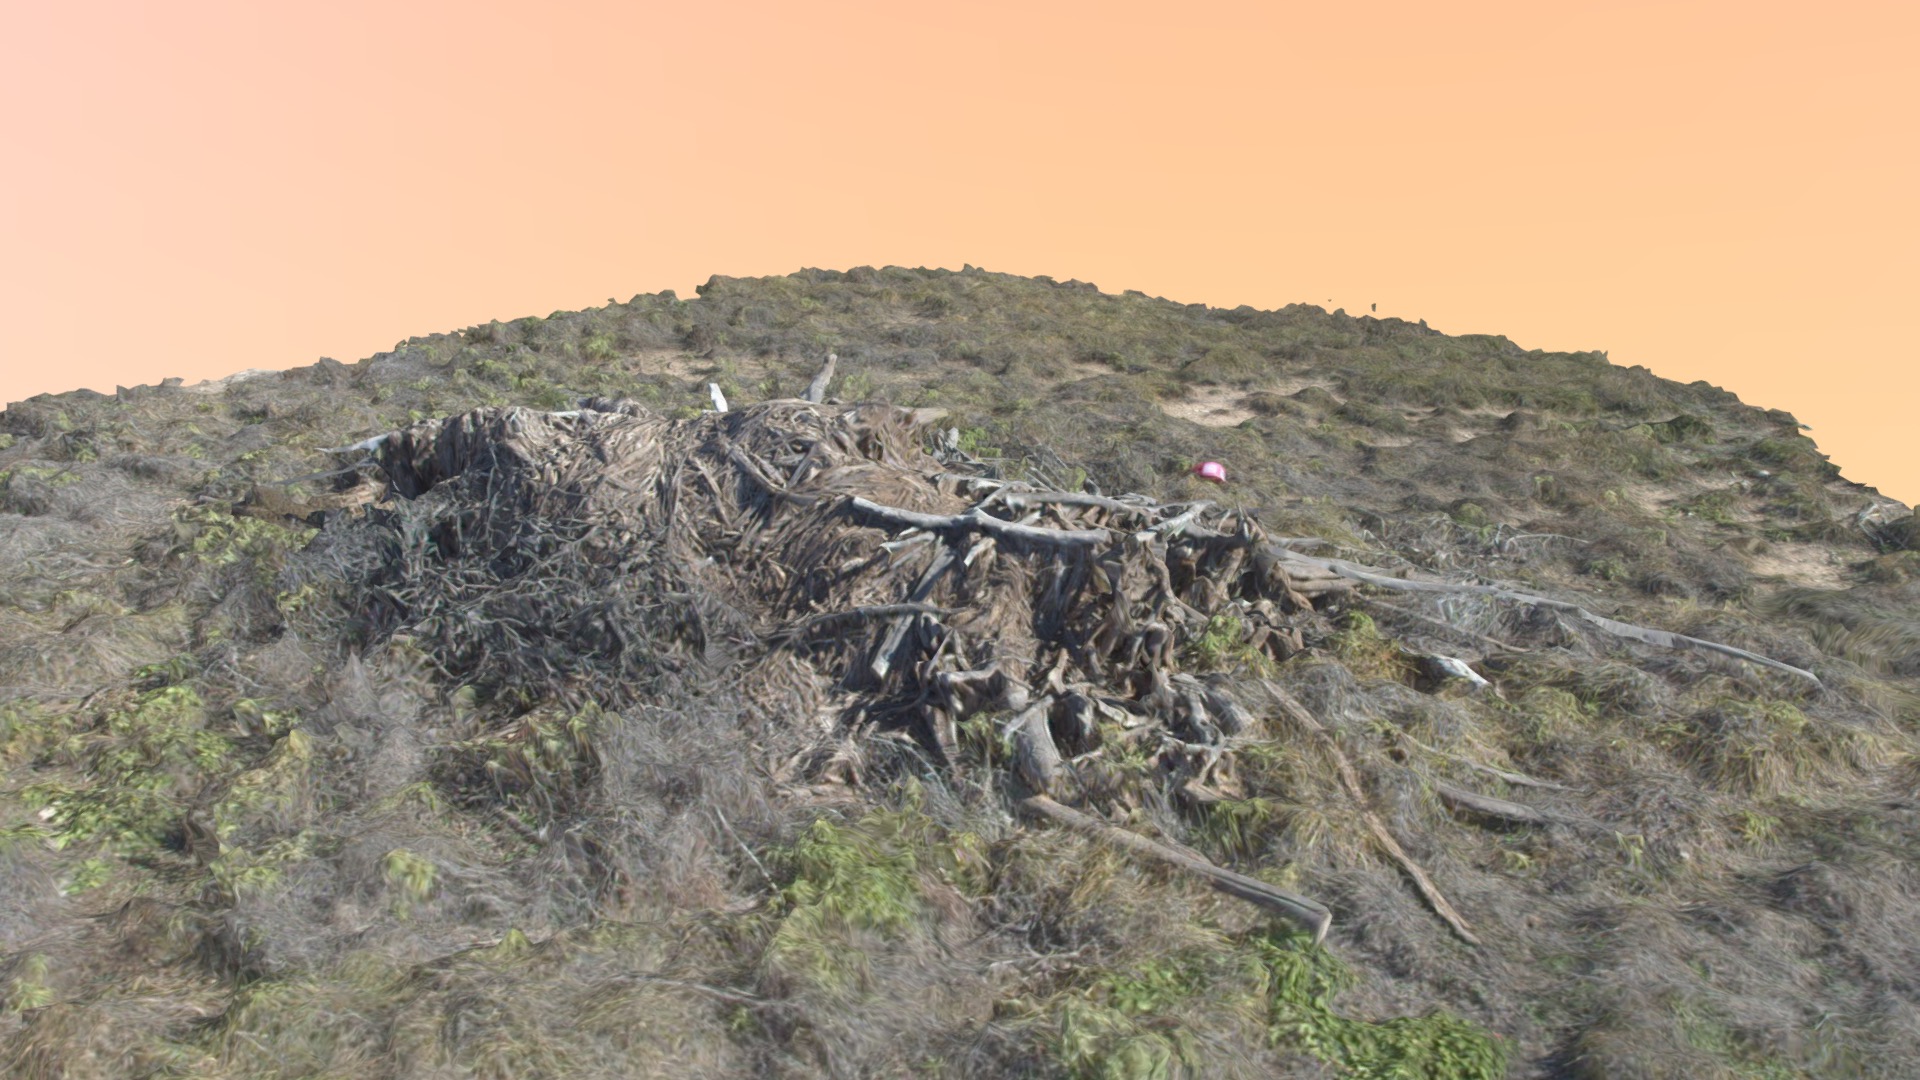 3D model brush pile 1 - This is a 3D model of the brush pile 1. The 3D model is about a hill with a pile of debris.